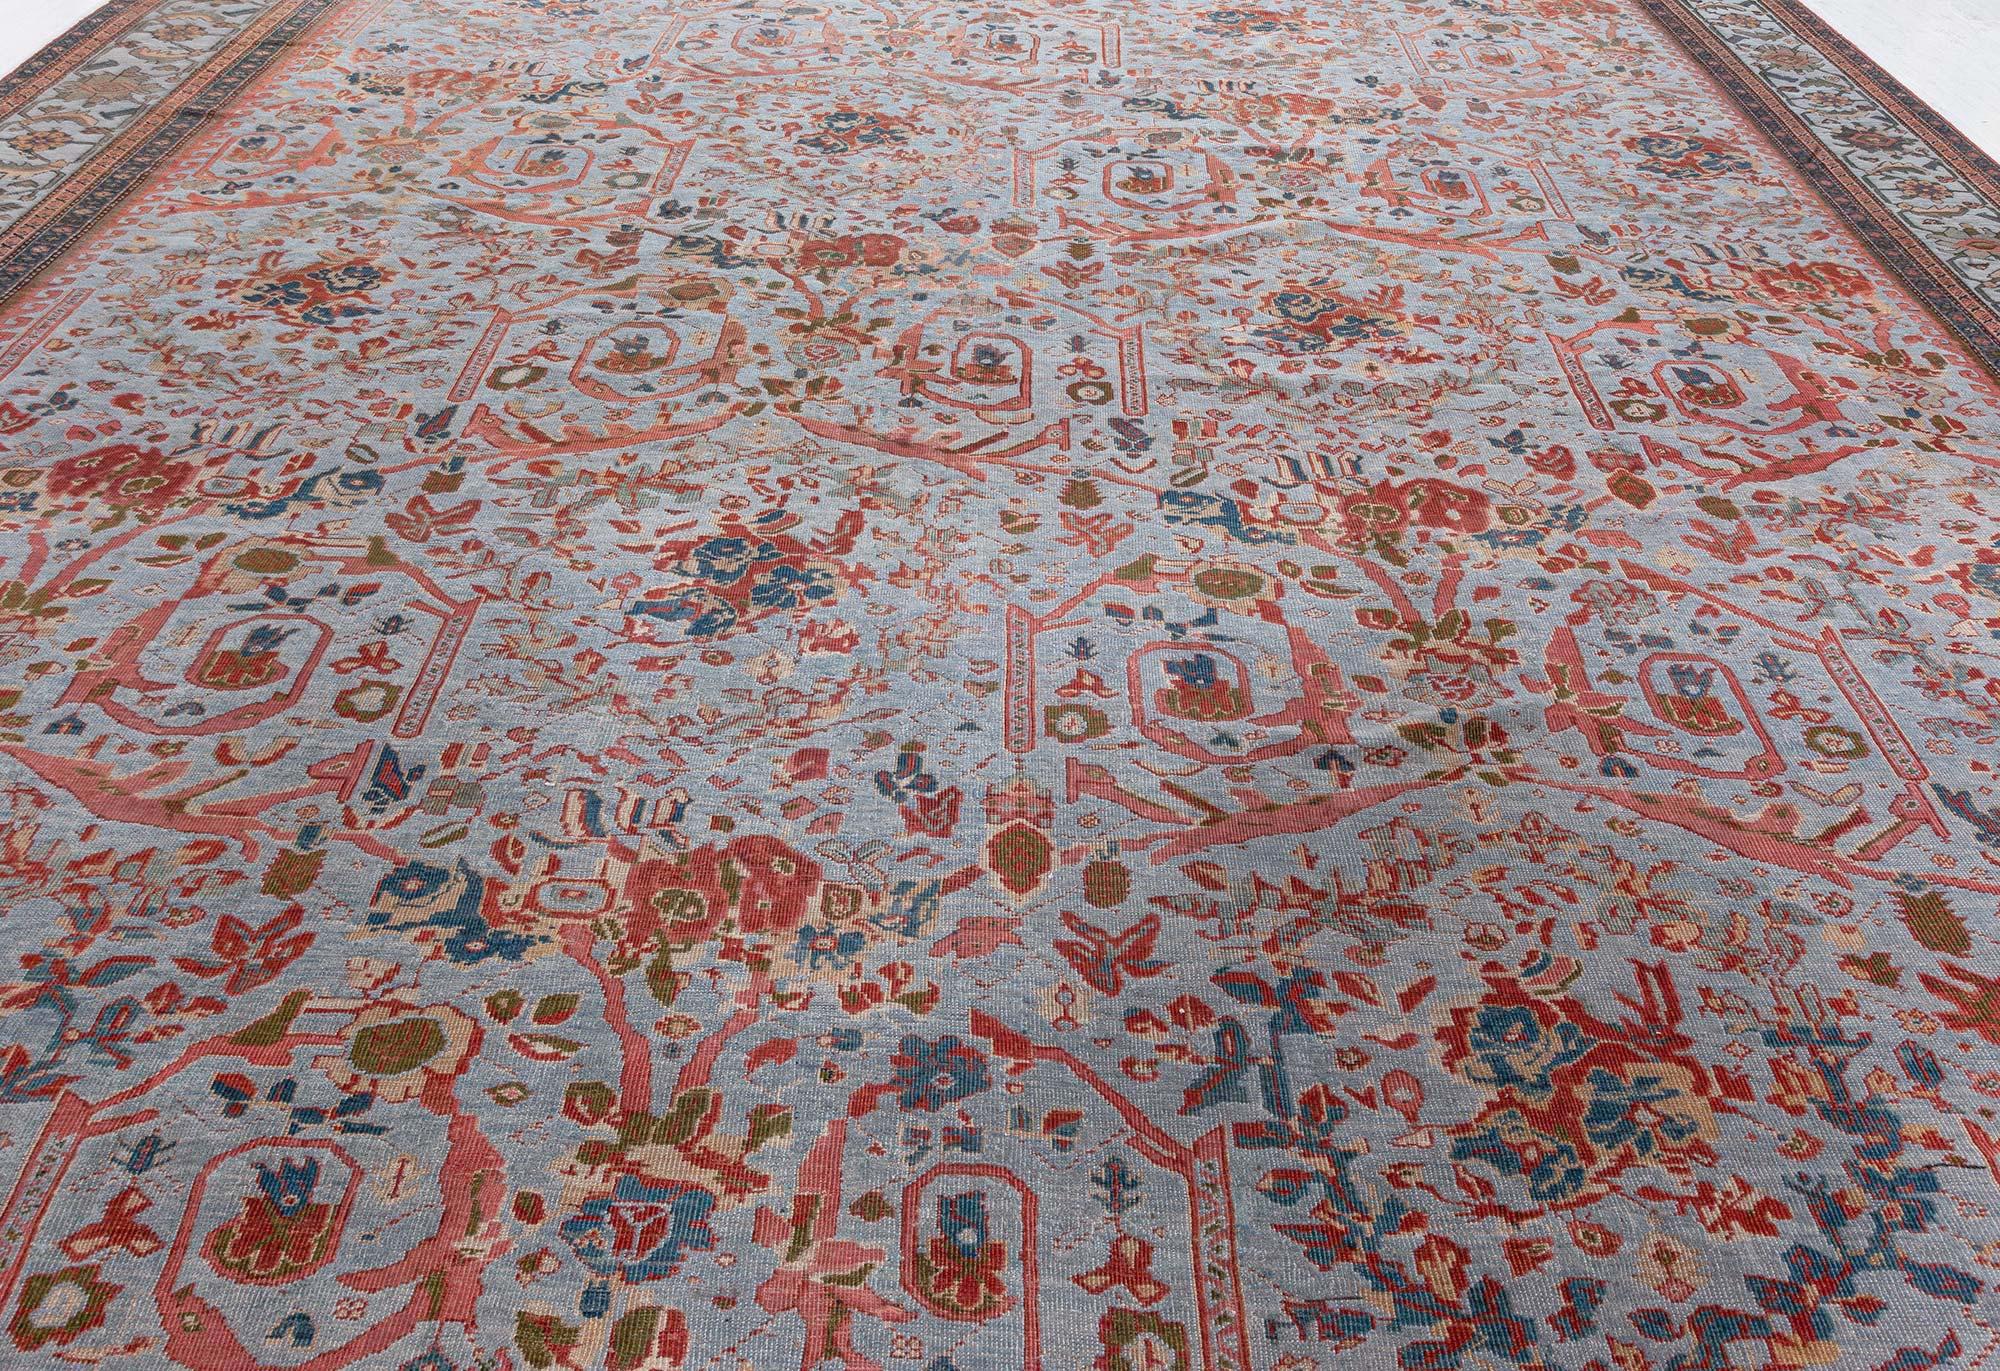 Rare Antique Persian Sultanabad Rug
Size: 13'9